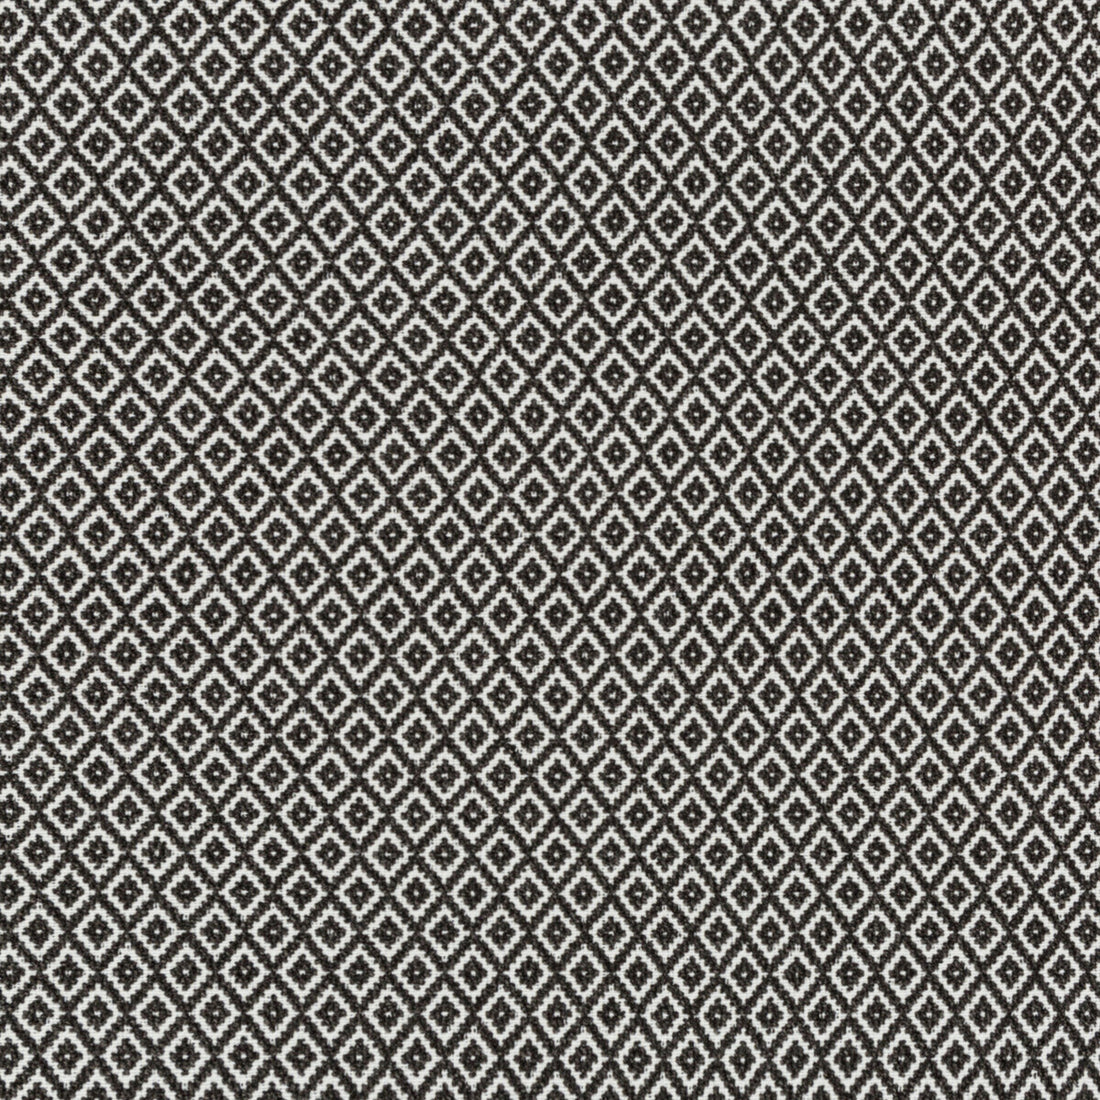 New Dimension fabric in charcoal color - pattern 35498.81.0 - by Kravet Couture in the Vista collection